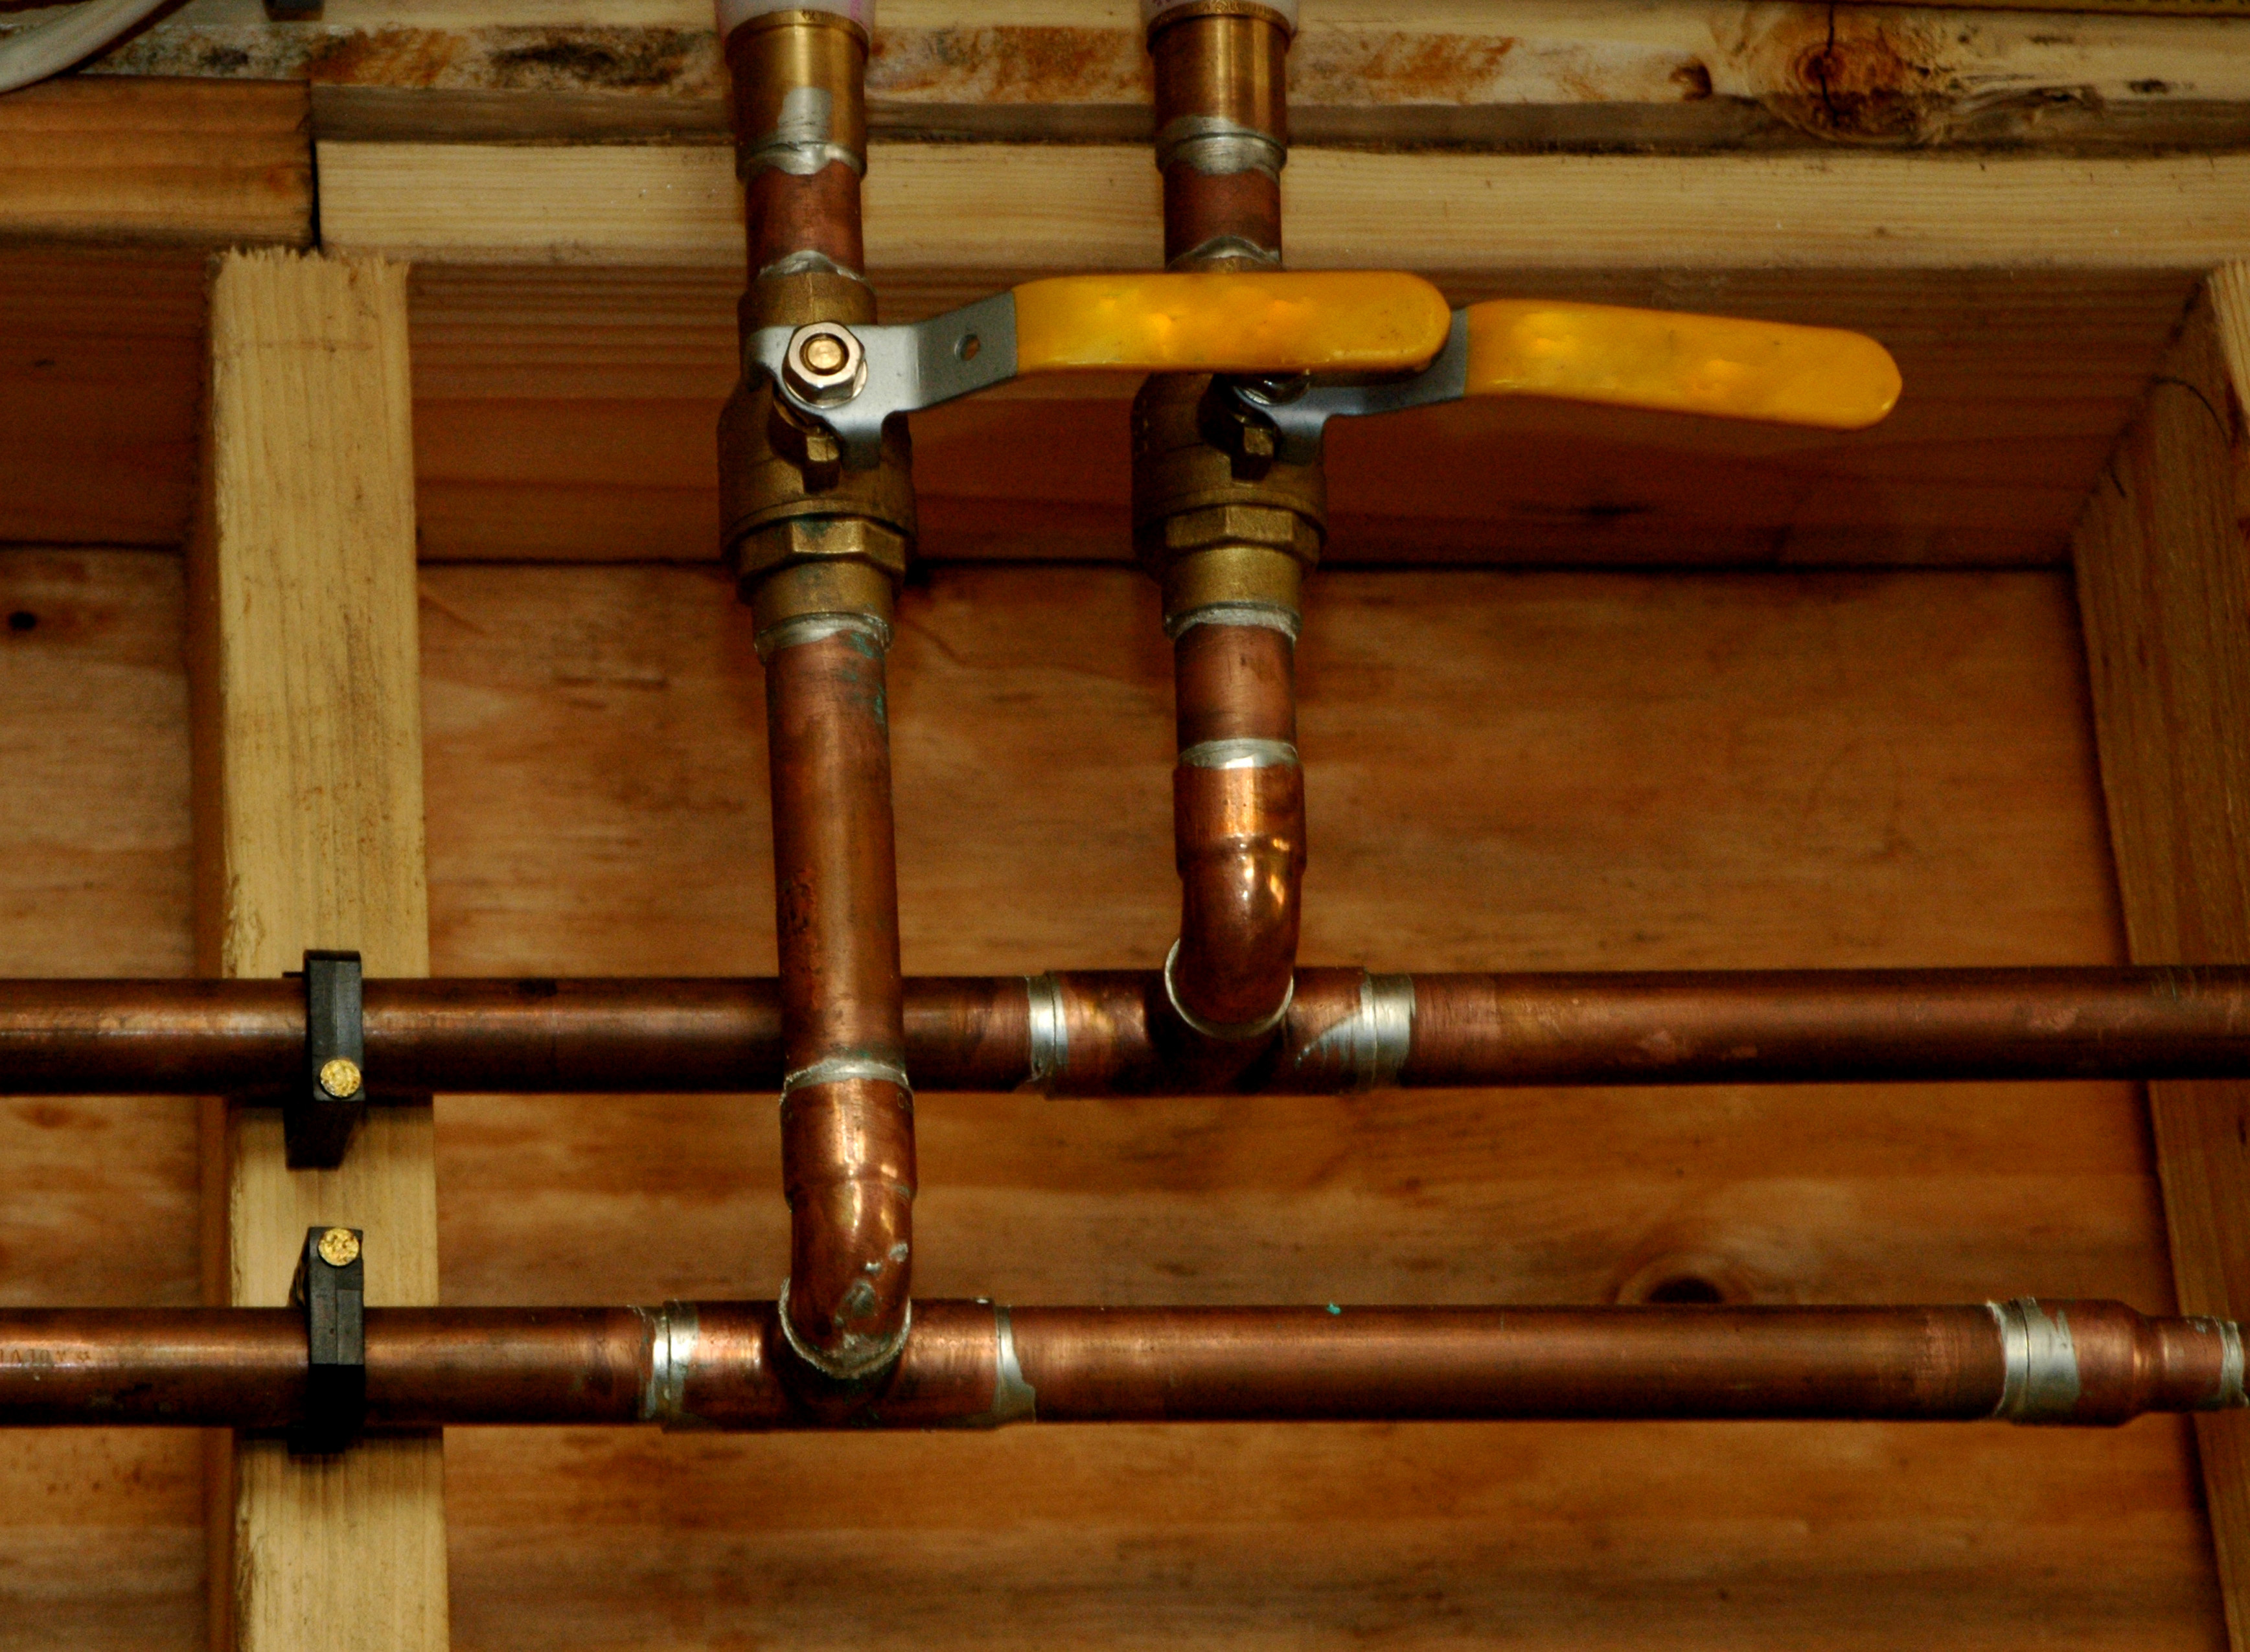 PEX Plumbing 101: When To Use It and The Benefits